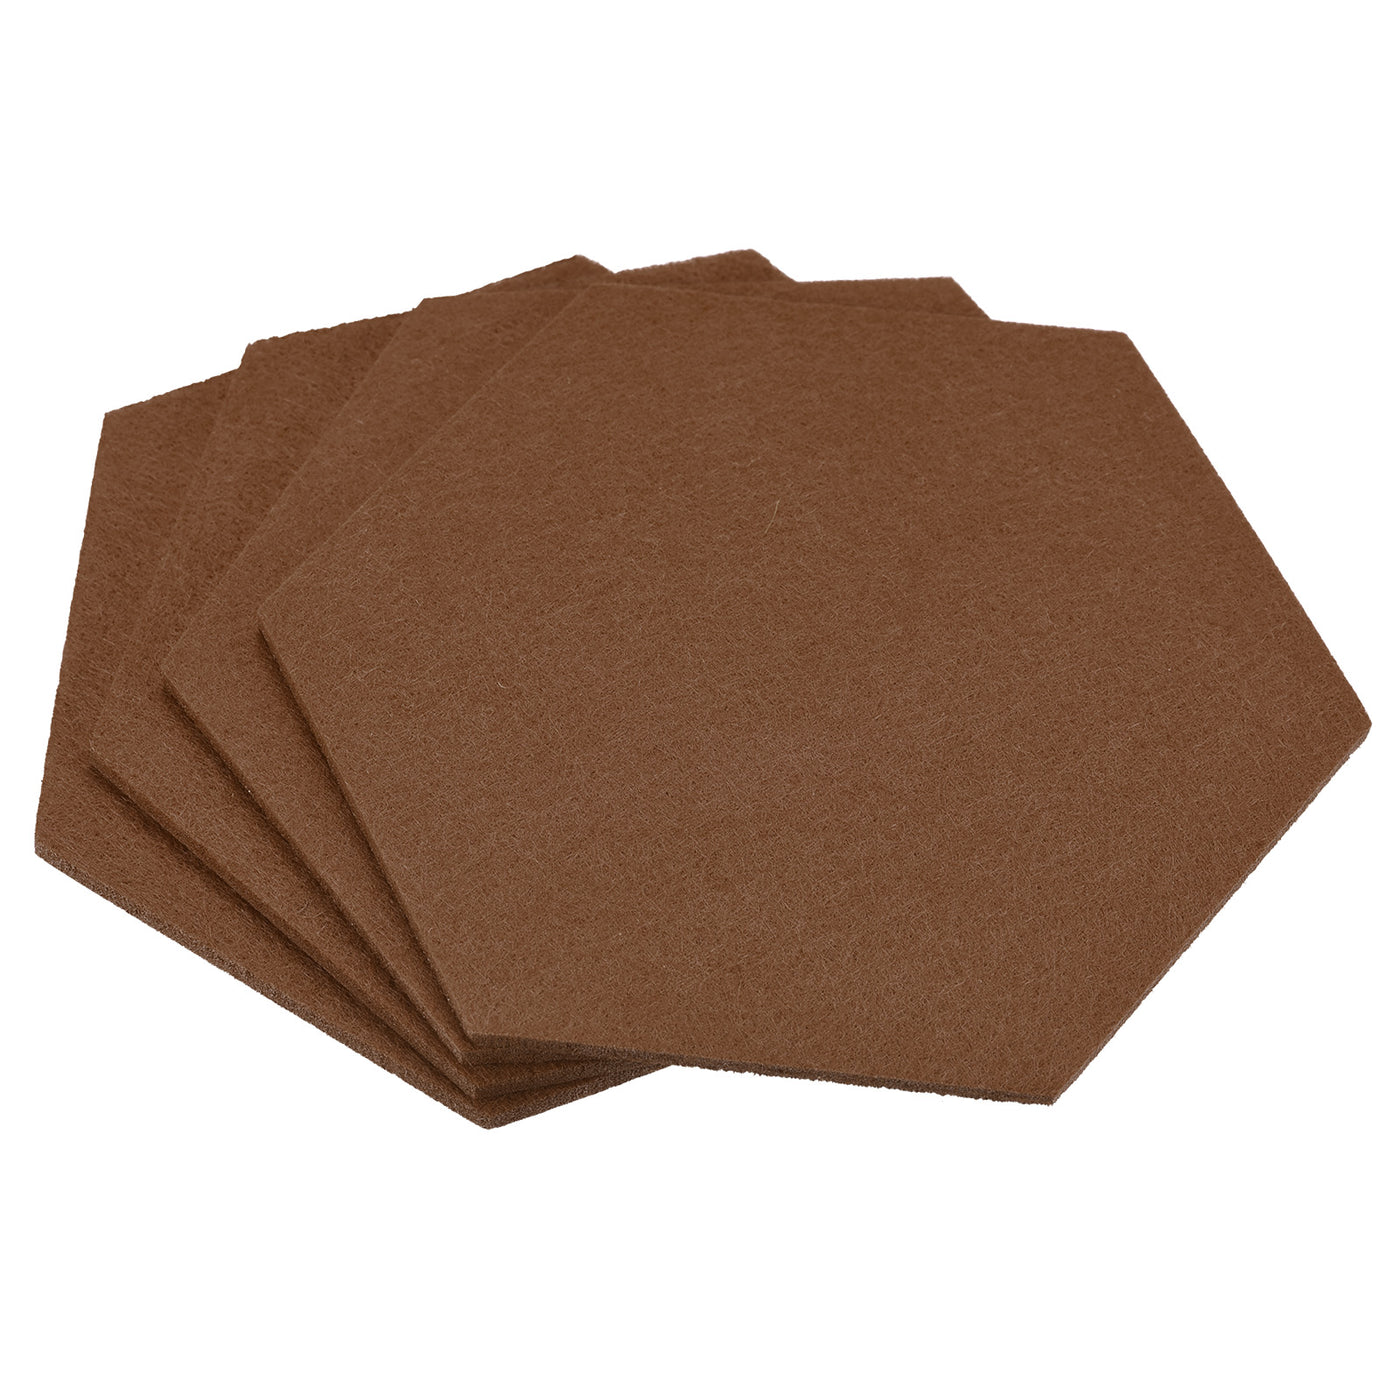 uxcell Uxcell Felt Coasters 4pcs Absorbent Pad Coaster for Drink Cup Pot Bowl Vase Brown